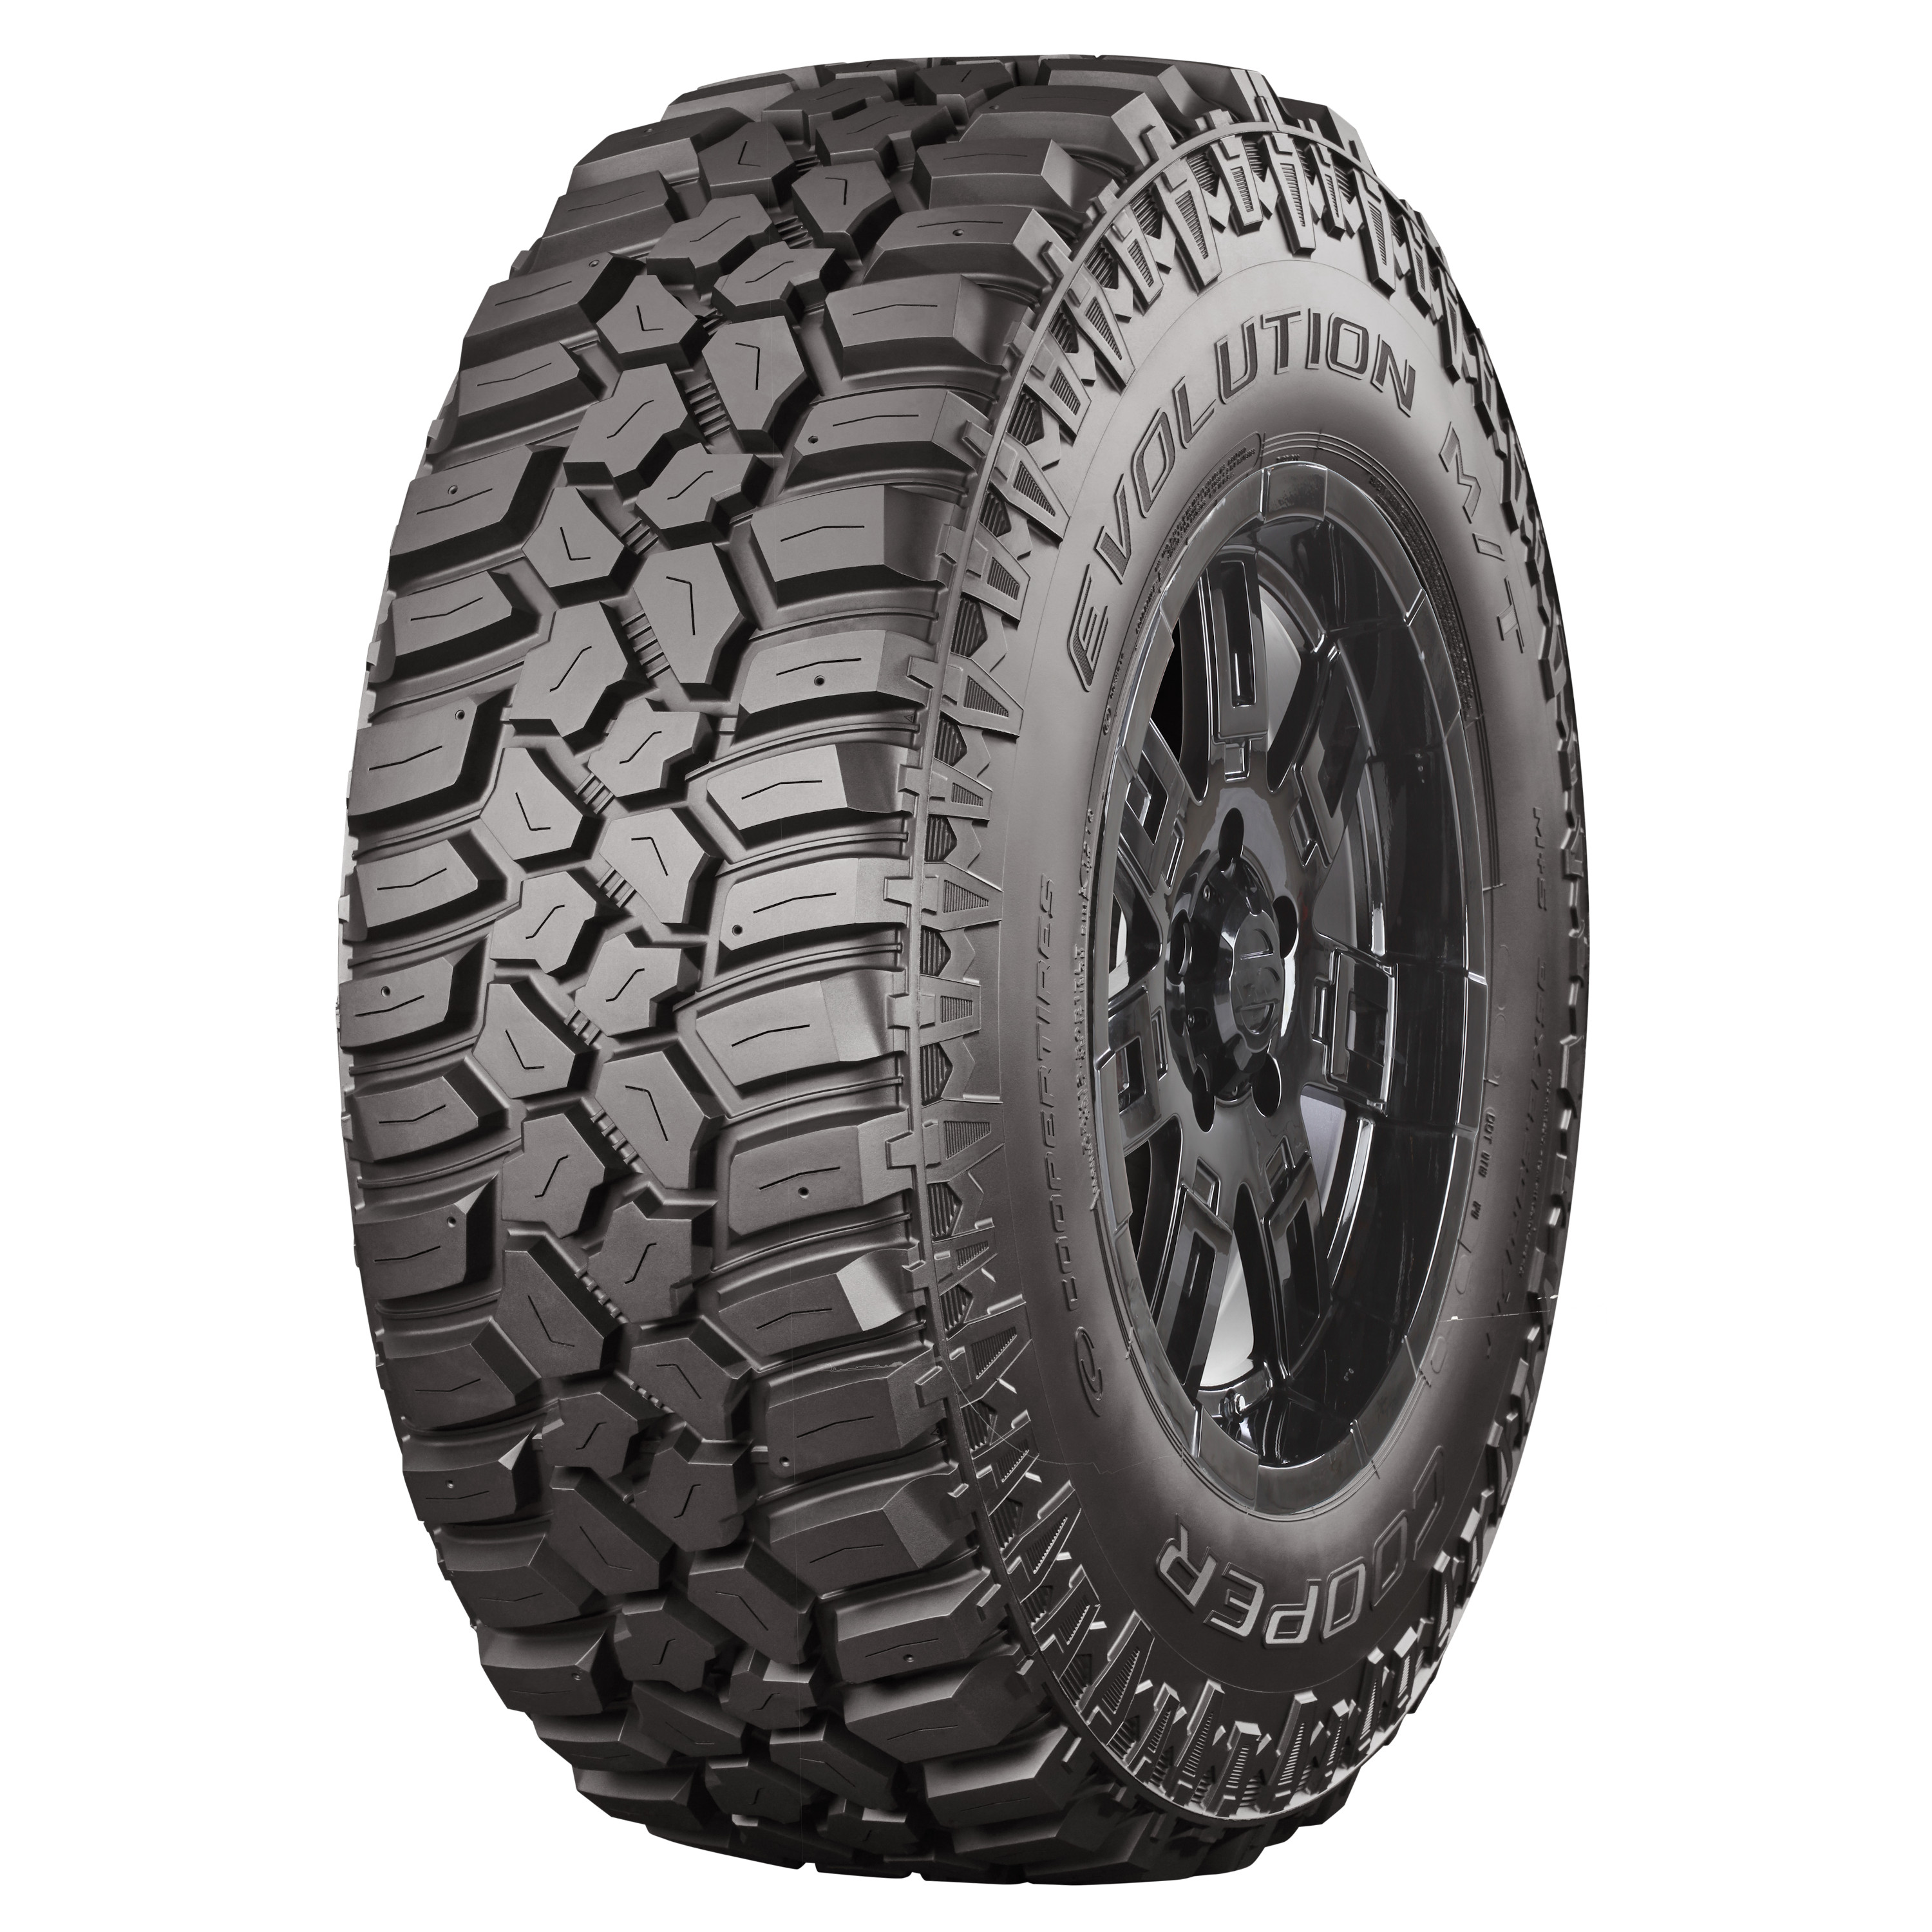 Amazon’s Prime Day Features Cooper Evolution M/T All-Season Tires: 20% off from $129 - $240